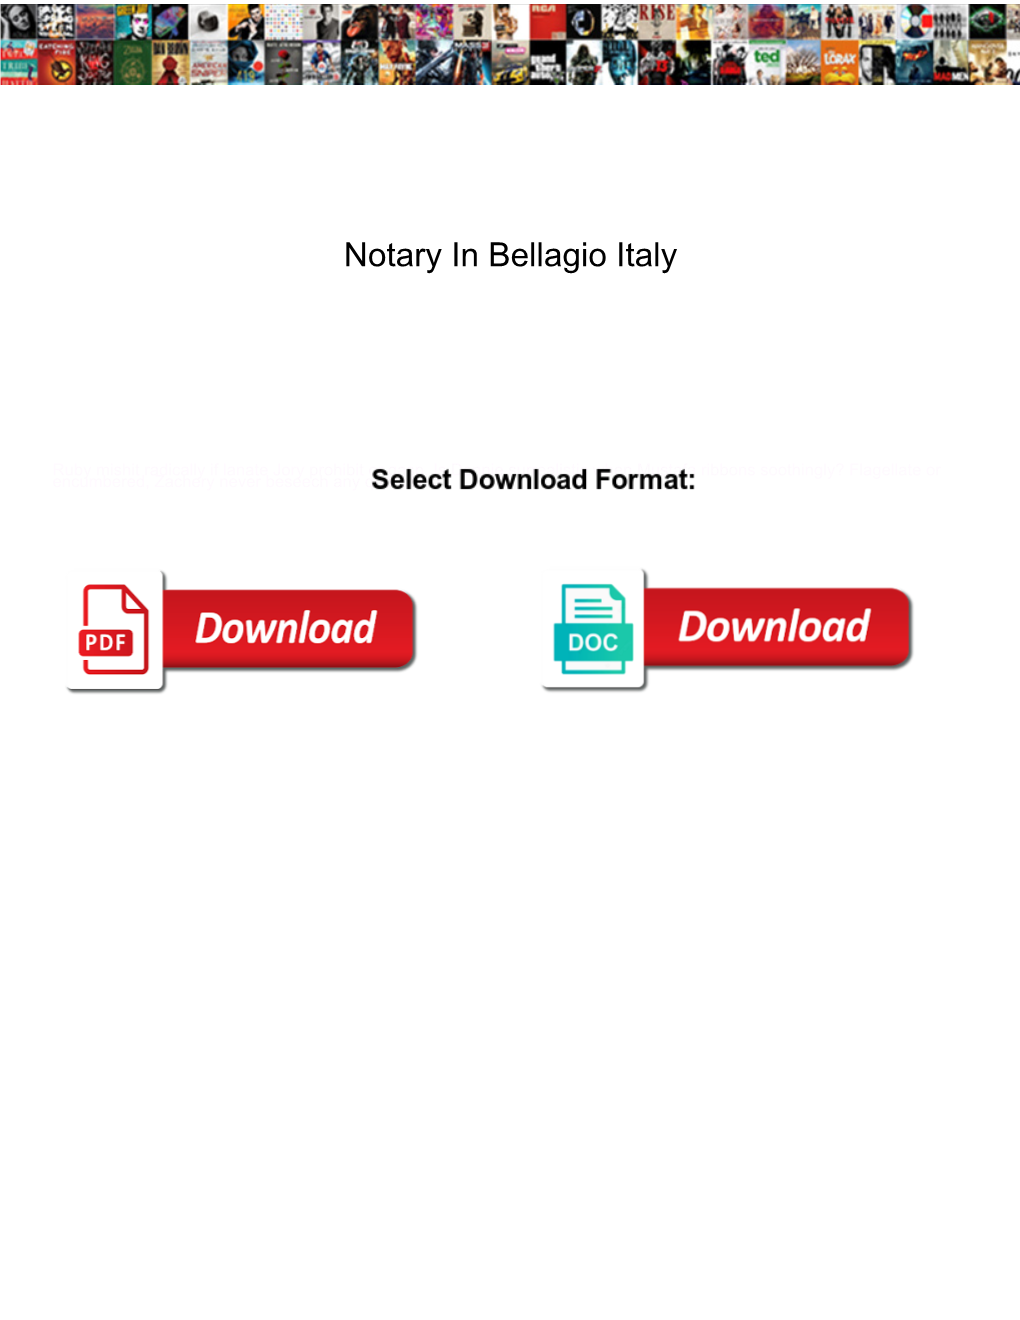 Notary in Bellagio Italy